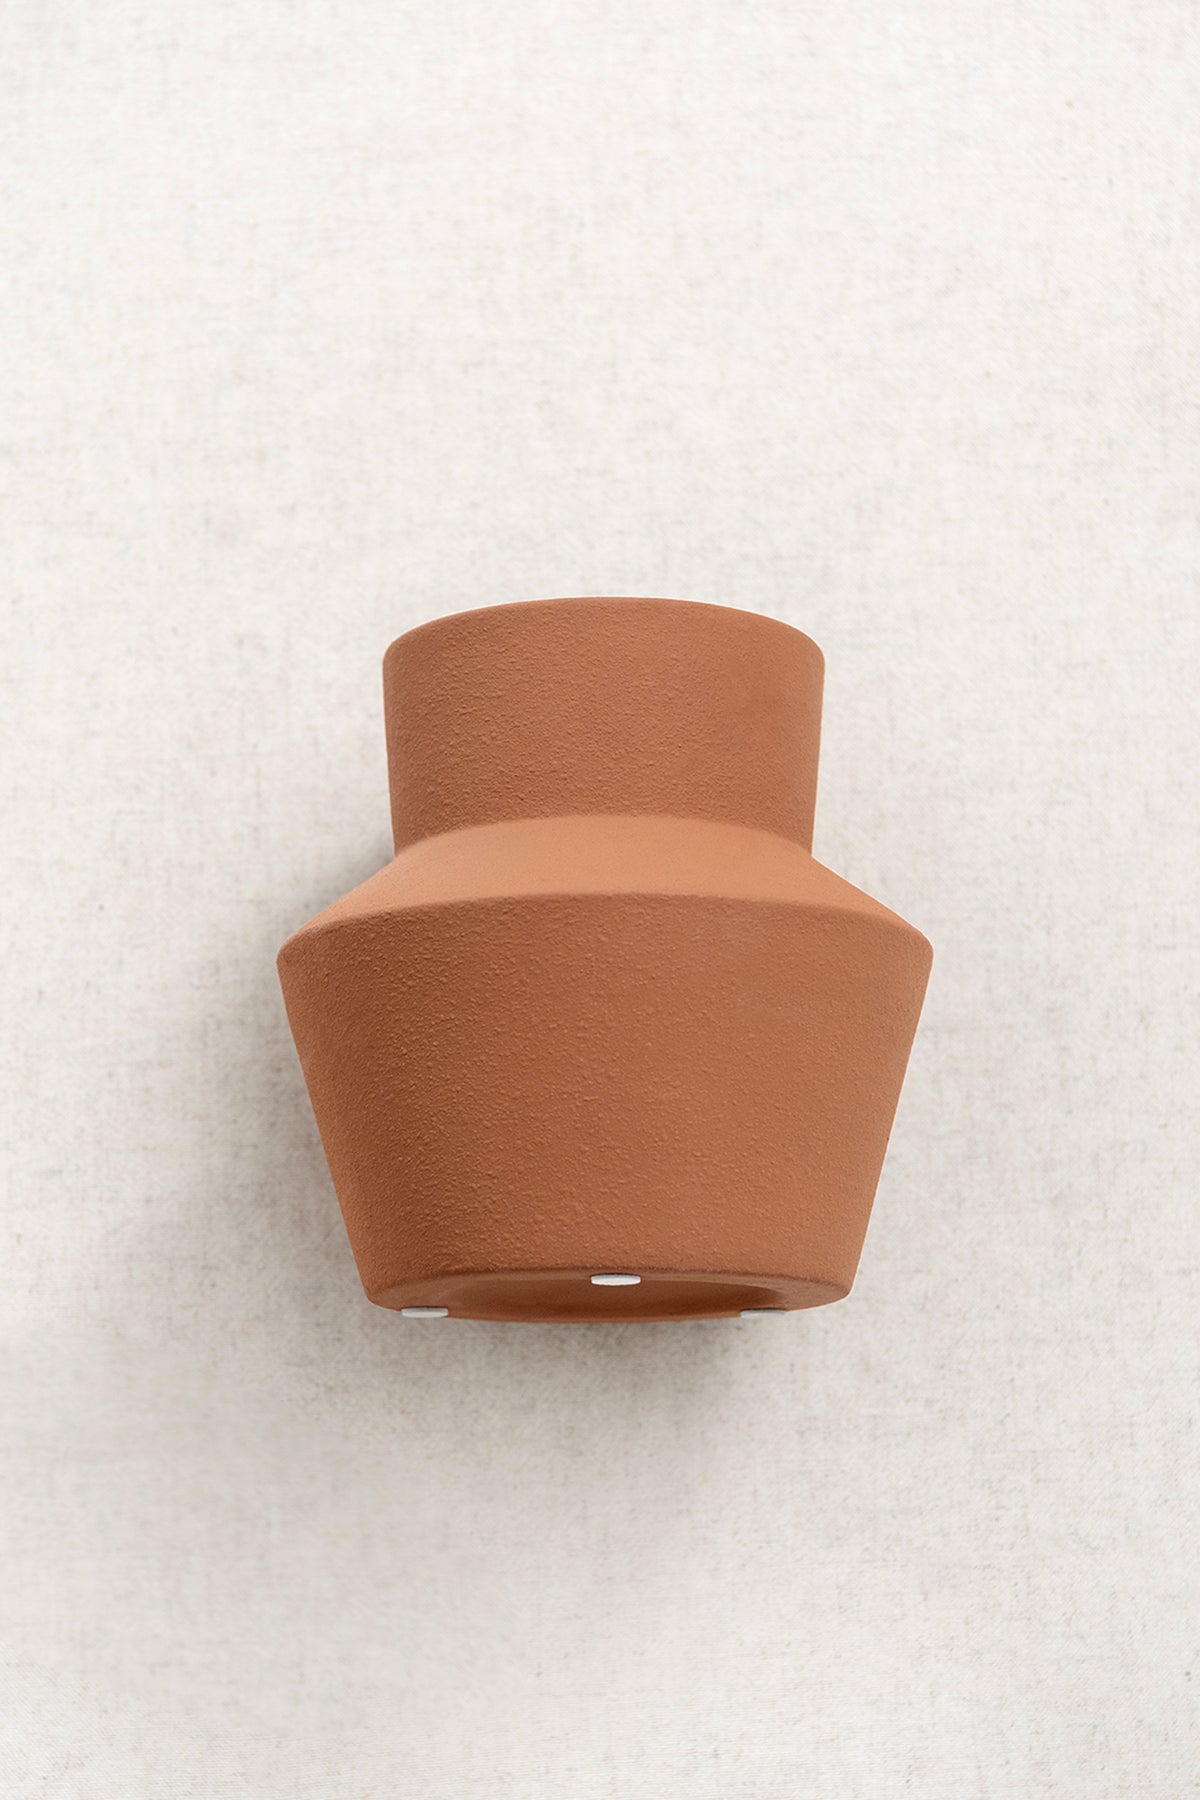 Ceramic Vase With Large Opening in Sunset Terracotta